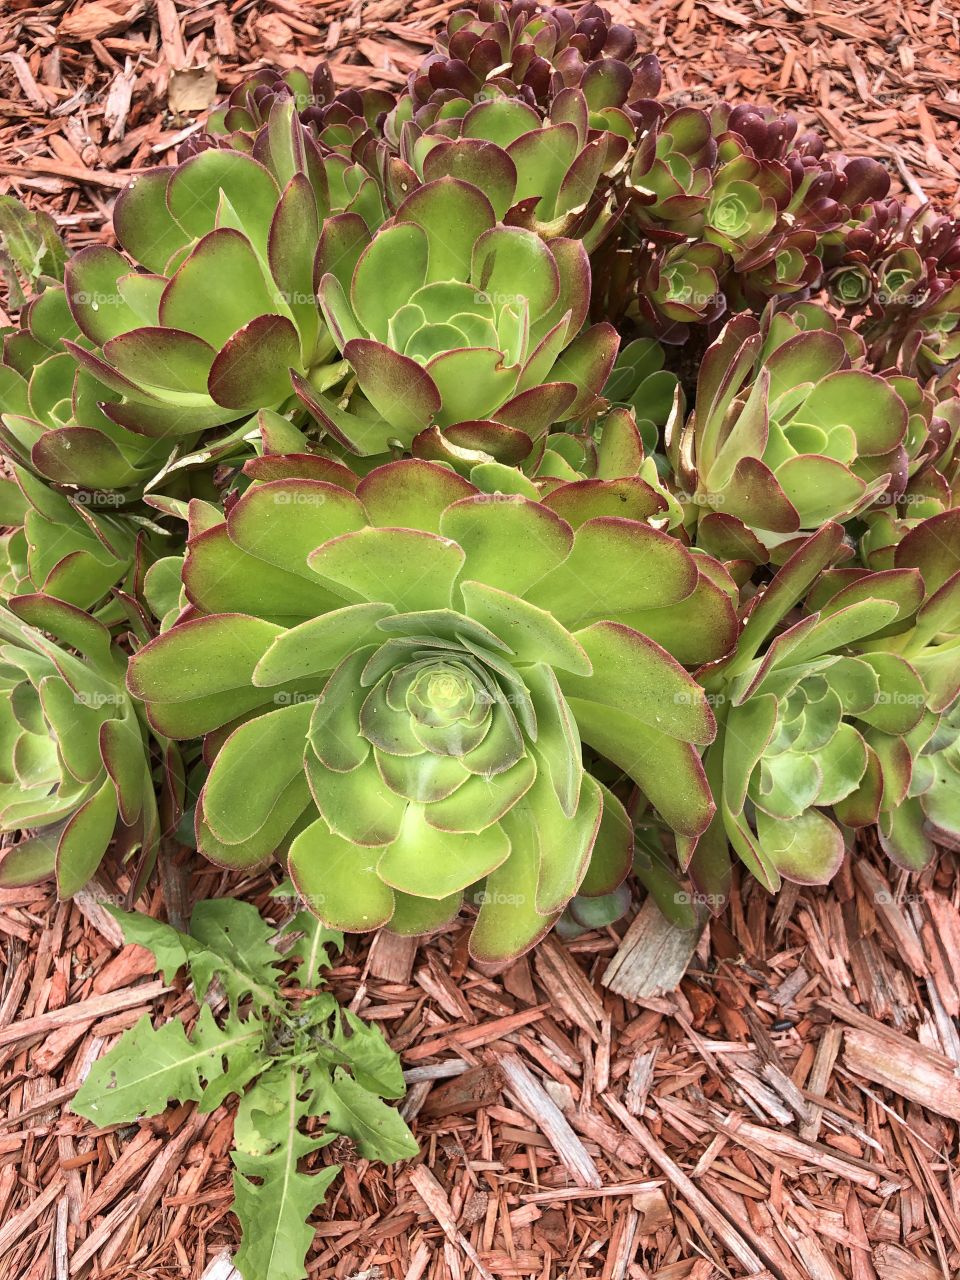 Gorgeous Succulents thriving in the California sun!